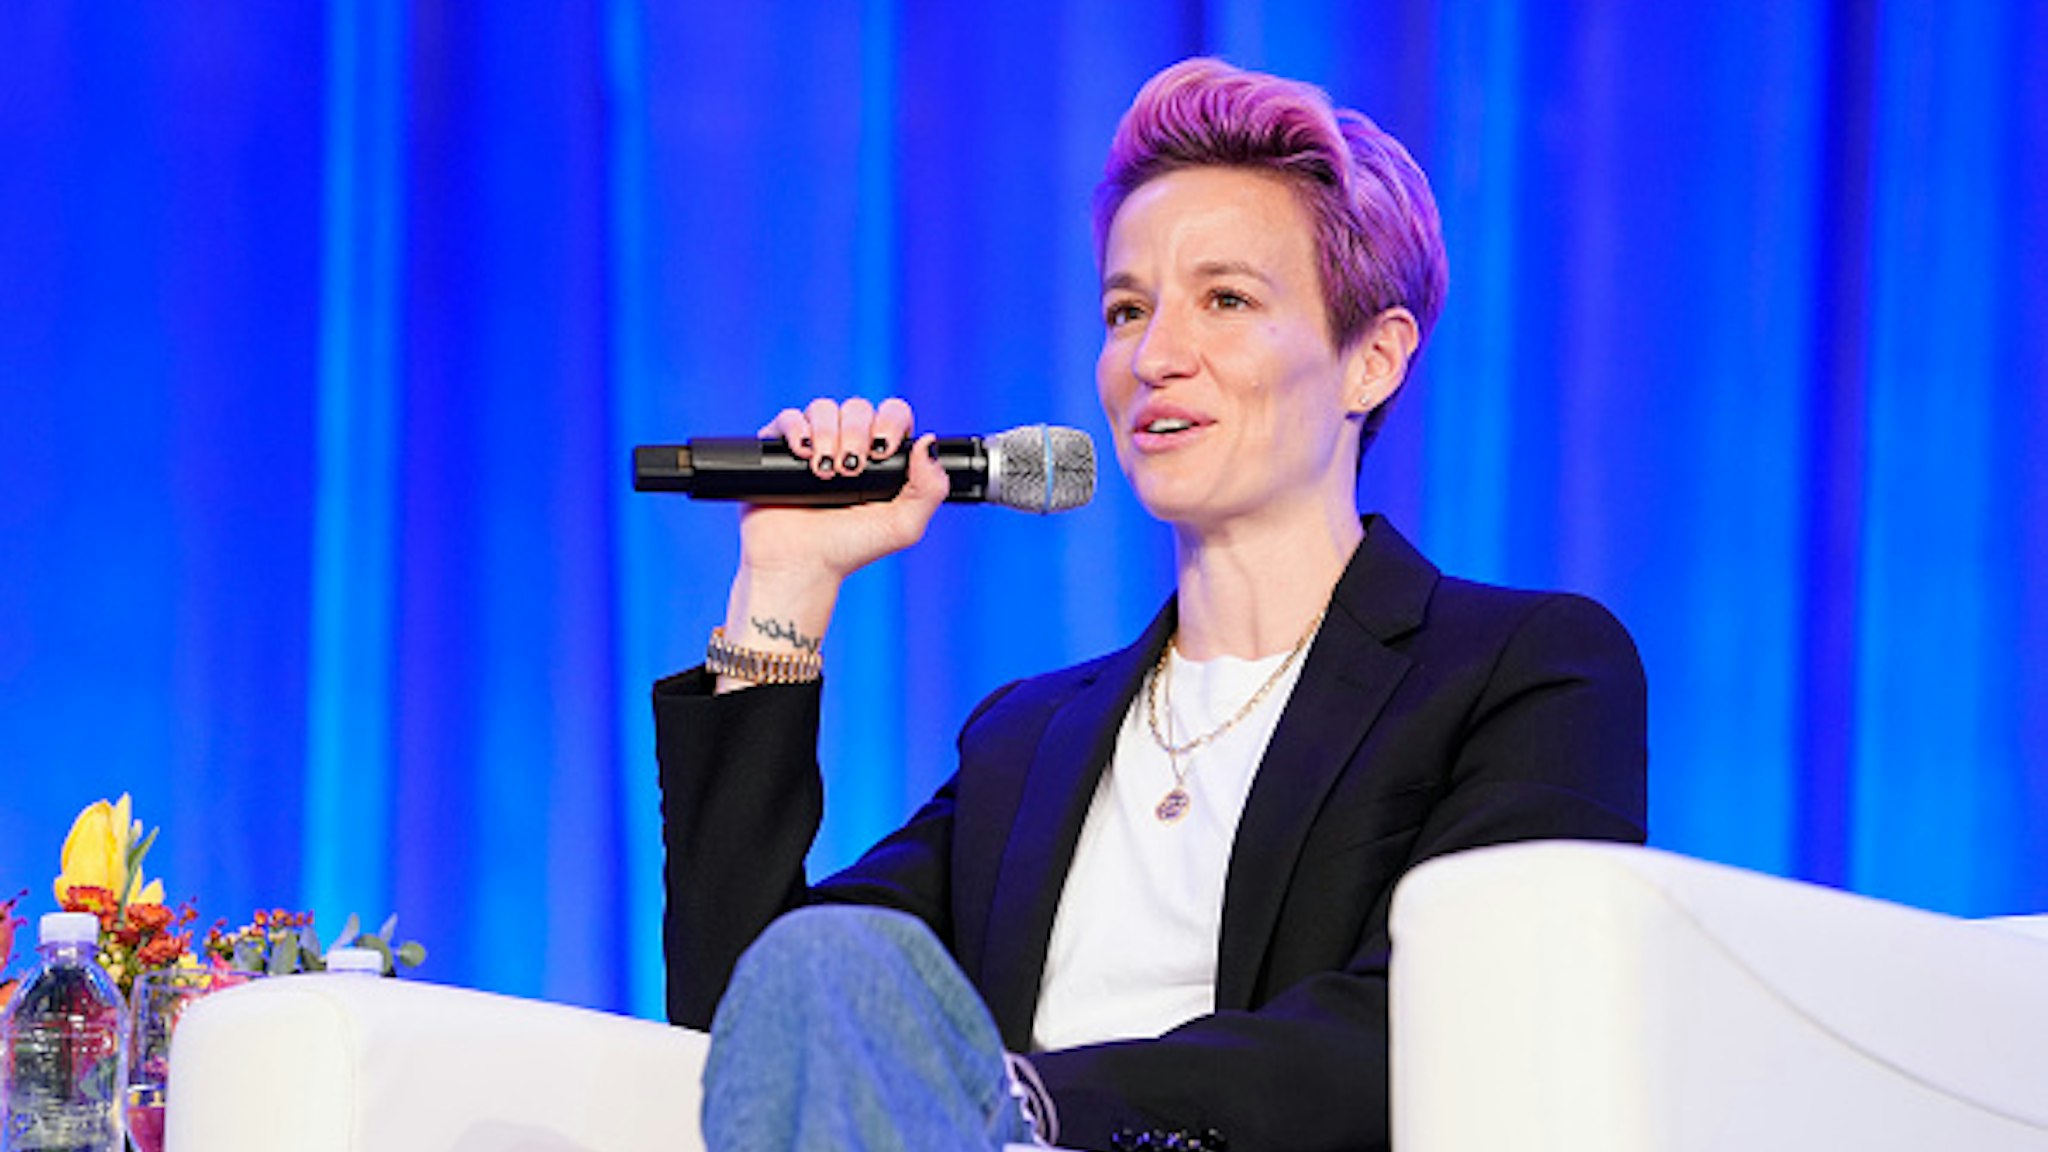 AUSTIN, TEXAS - OCTOBER 24: Two-time World Cup Champion, and co-captain of the US Women’s National Team Megan Rapinoe speaks on stage during Texas Conference For Women 2019 at Austin Convention Center on October 24, 2019 in Austin, Texas.